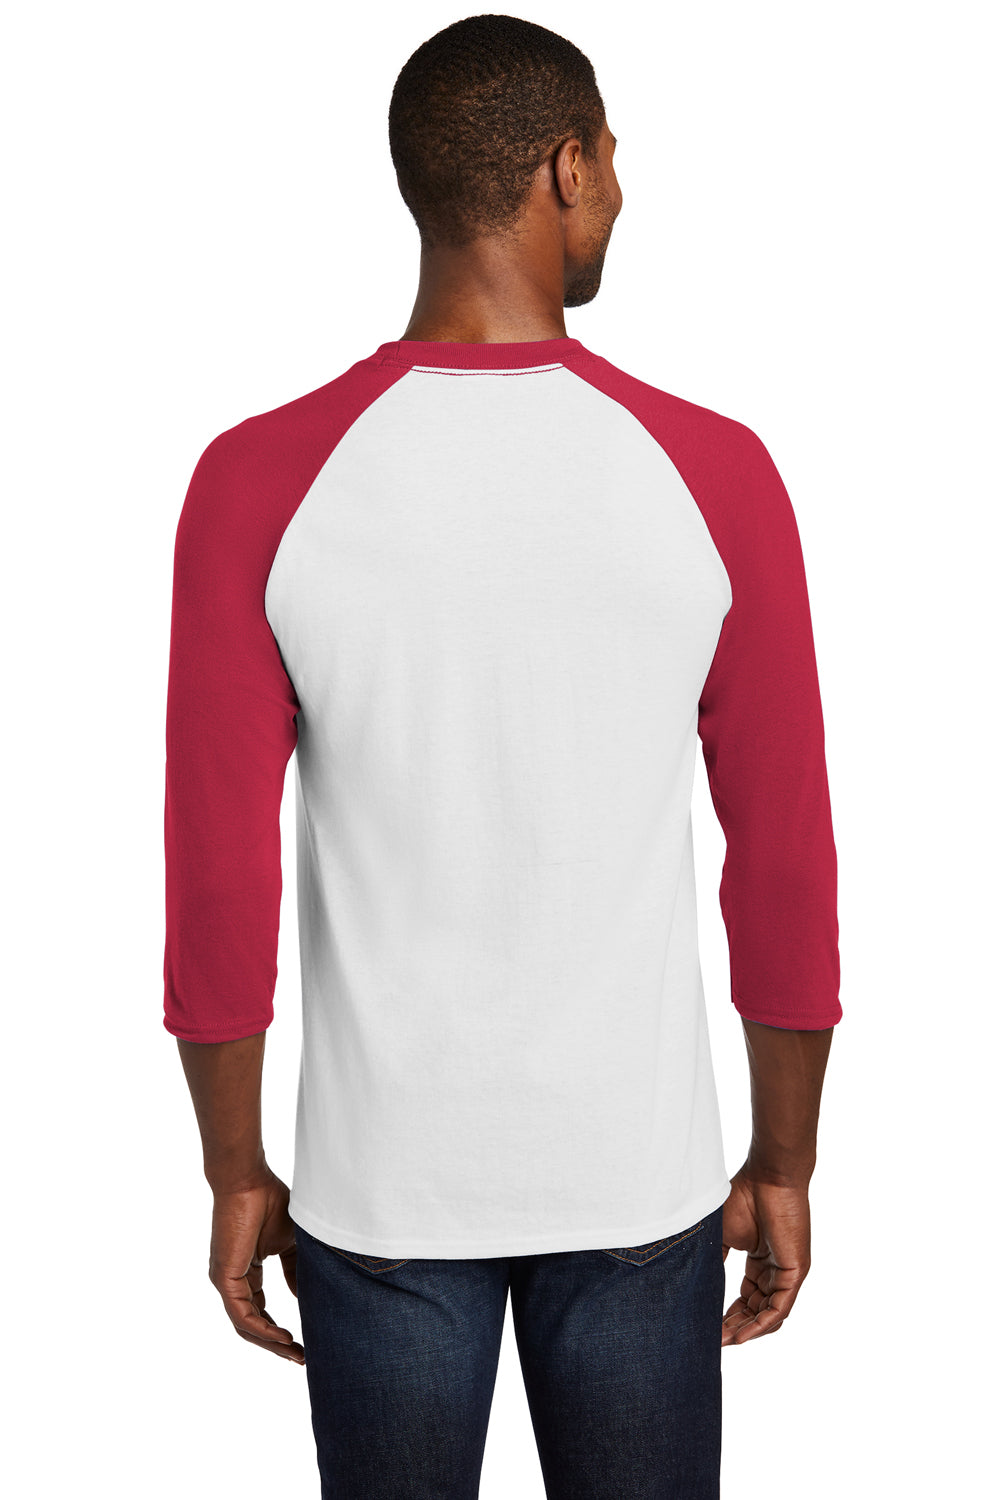 Port & Company PC55RS Mens Core Moisture Wicking 3/4 Sleeve Crewneck T-Shirt White/Red Back